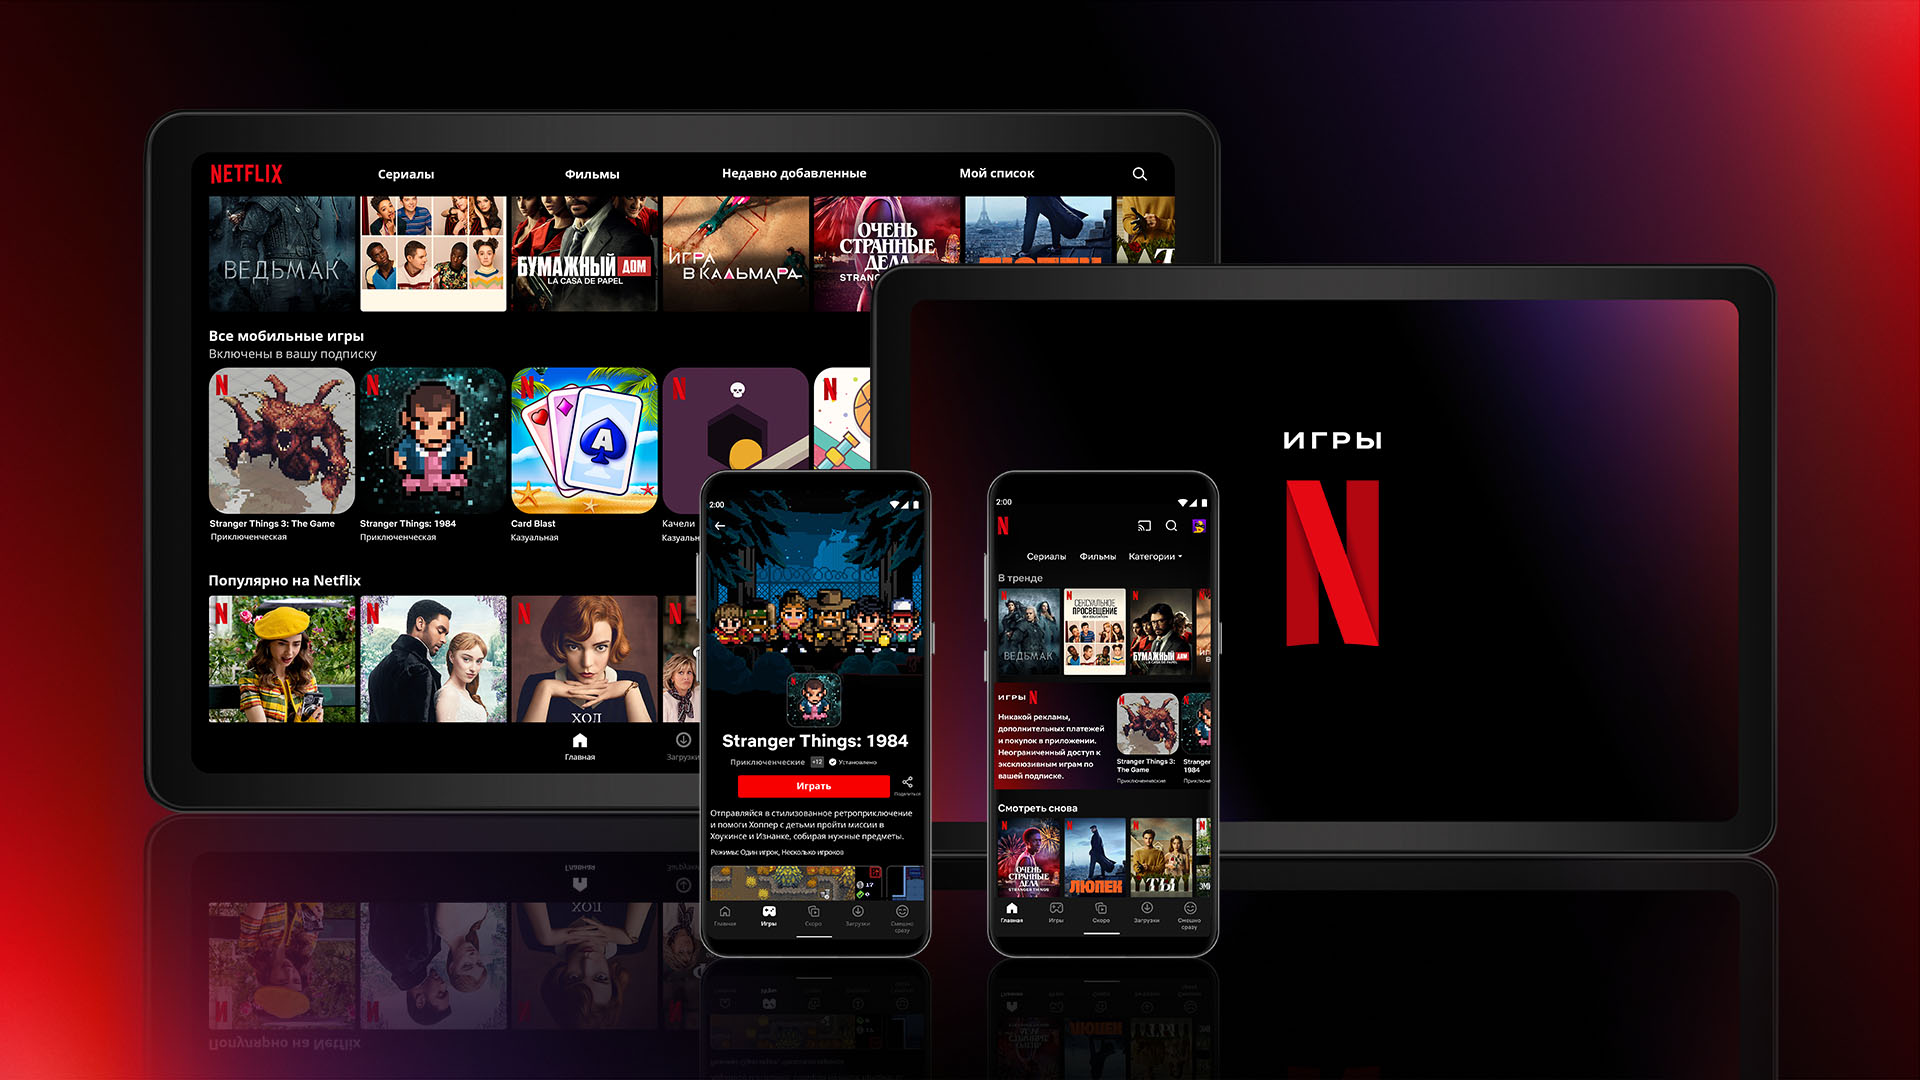 Let the Games Begin: A New Way to Experience Entertainment on Mobile -  About Netflix